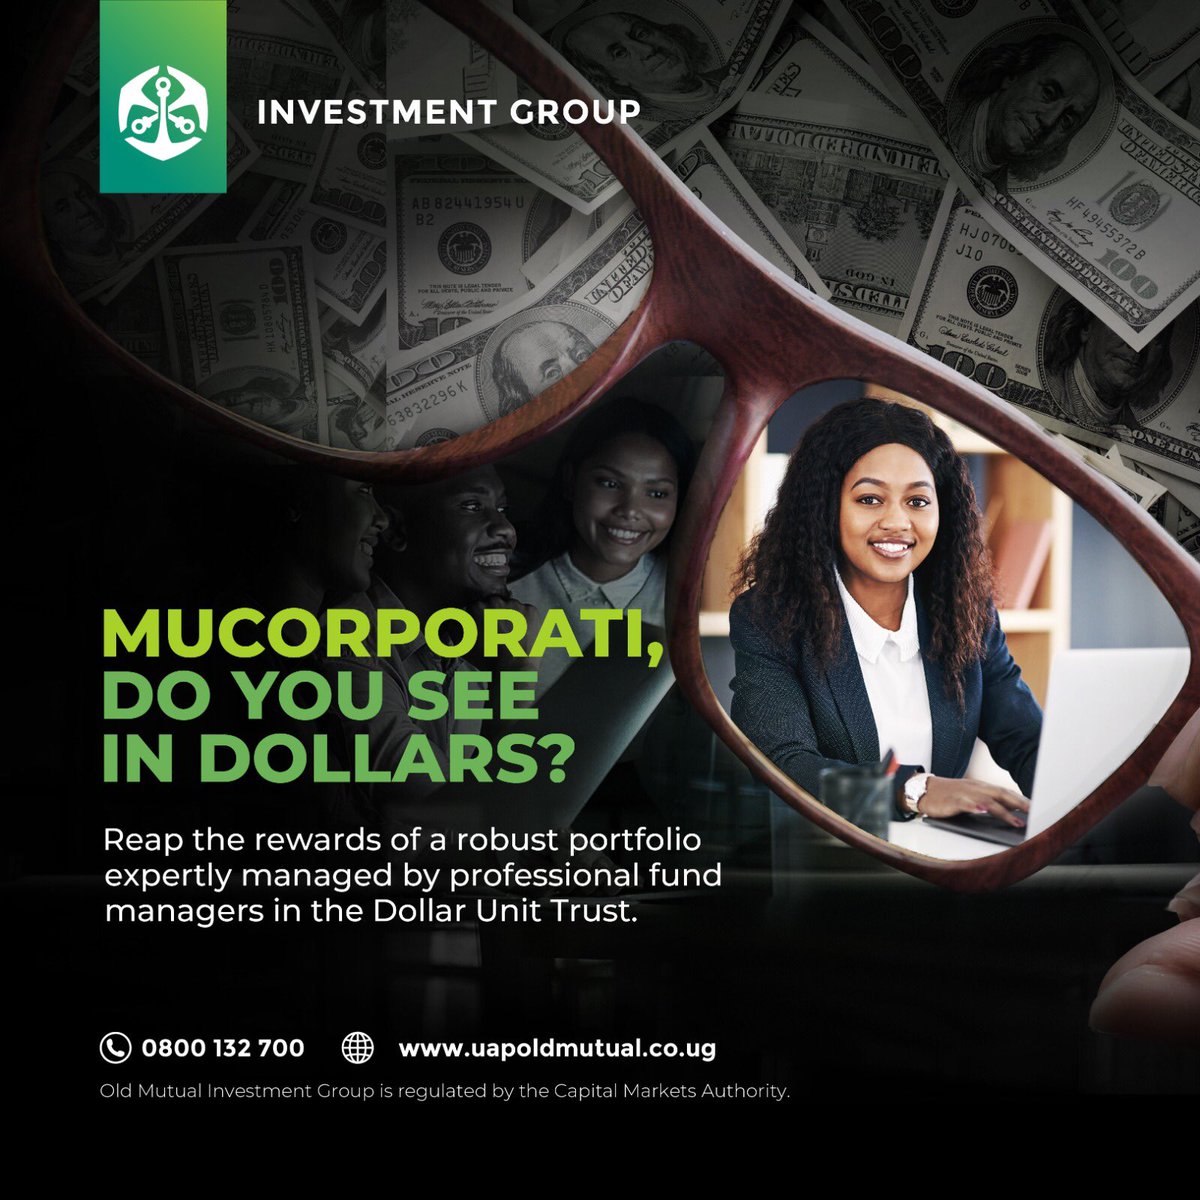 Looking for robust growth potential? Dollar Unit Trusts offer compelling opportunities over the medium to long term. Your financial future awaits #CapitalGrowth #InvestForTheFuture #TutambuleFfena #DollarUnitTrust